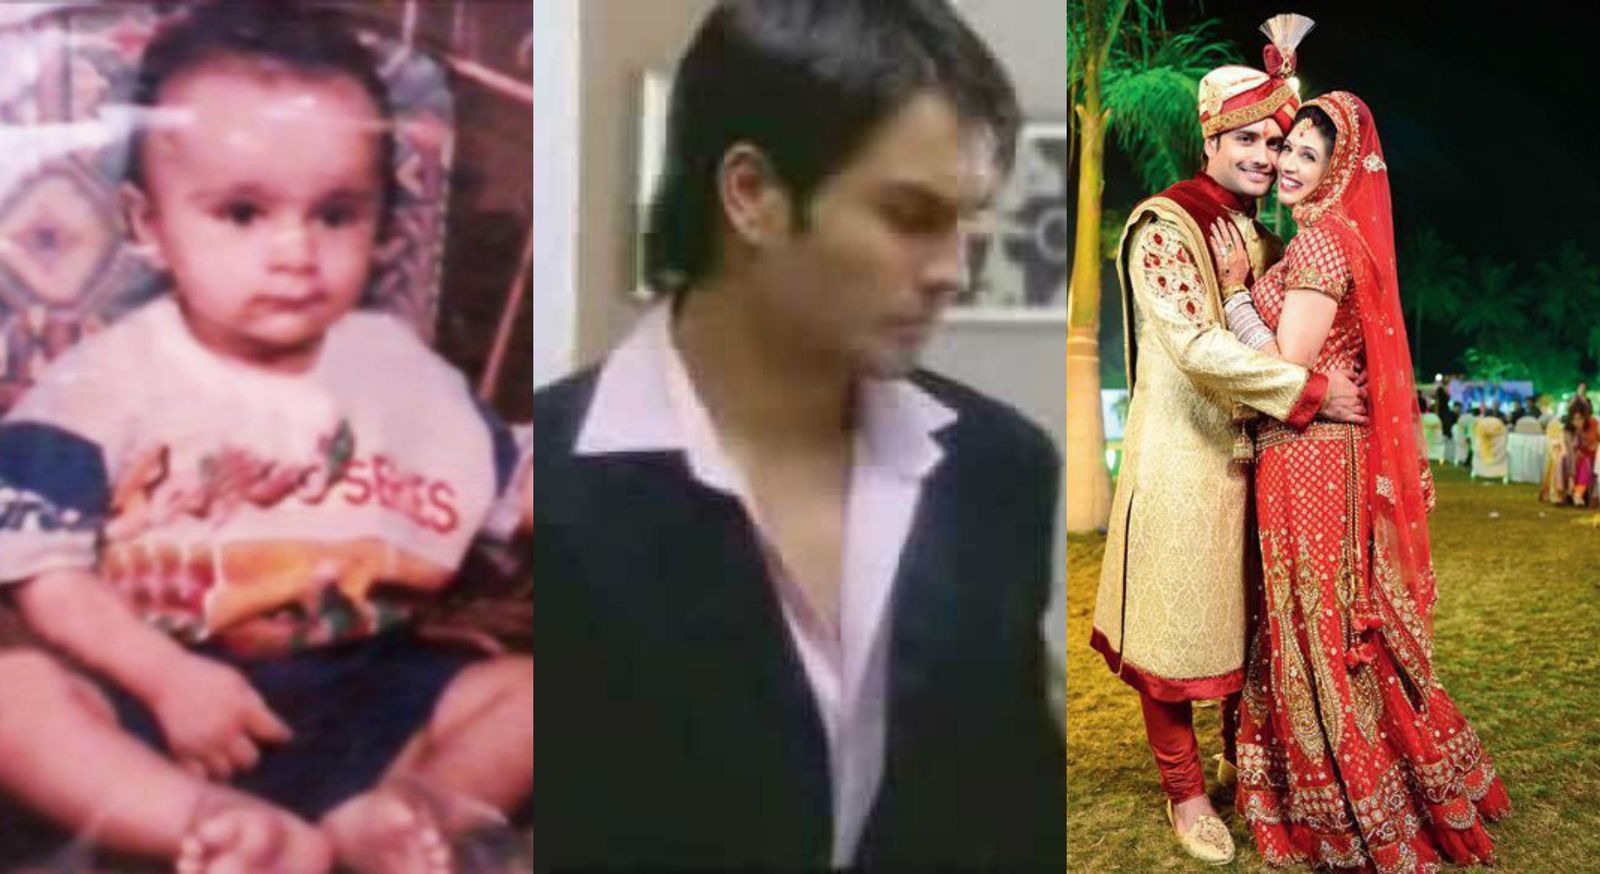 20 Facts You Can't Miss About Madhubala's RK AKA Vivian Dsena 